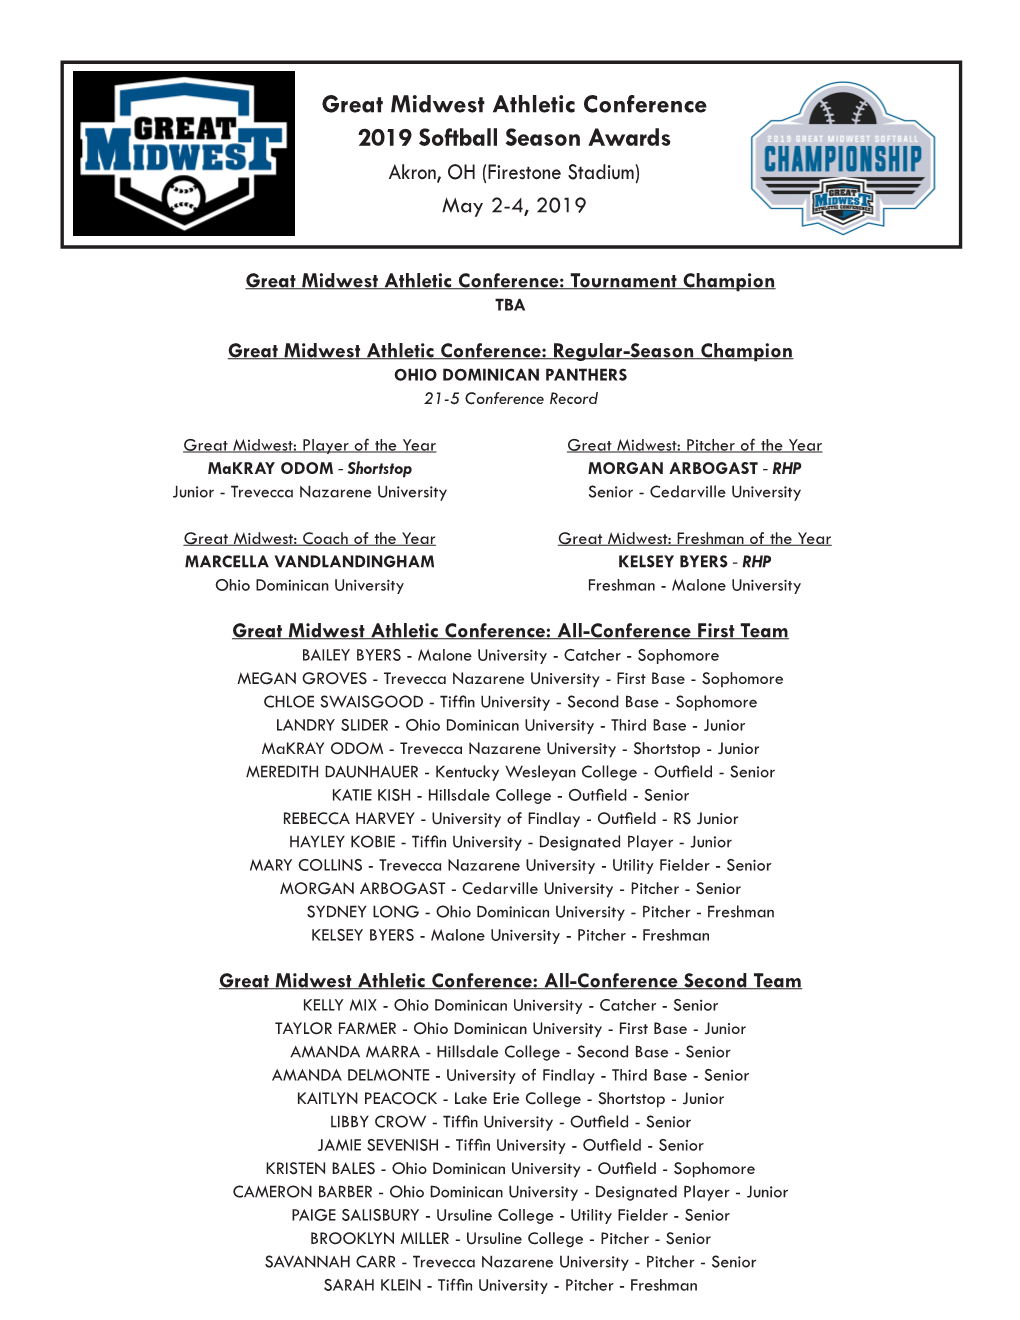 Great Midwest Athletic Conference 2019 Softball Season Awards Akron, OH (Firestone Stadium) May 2-4, 2019